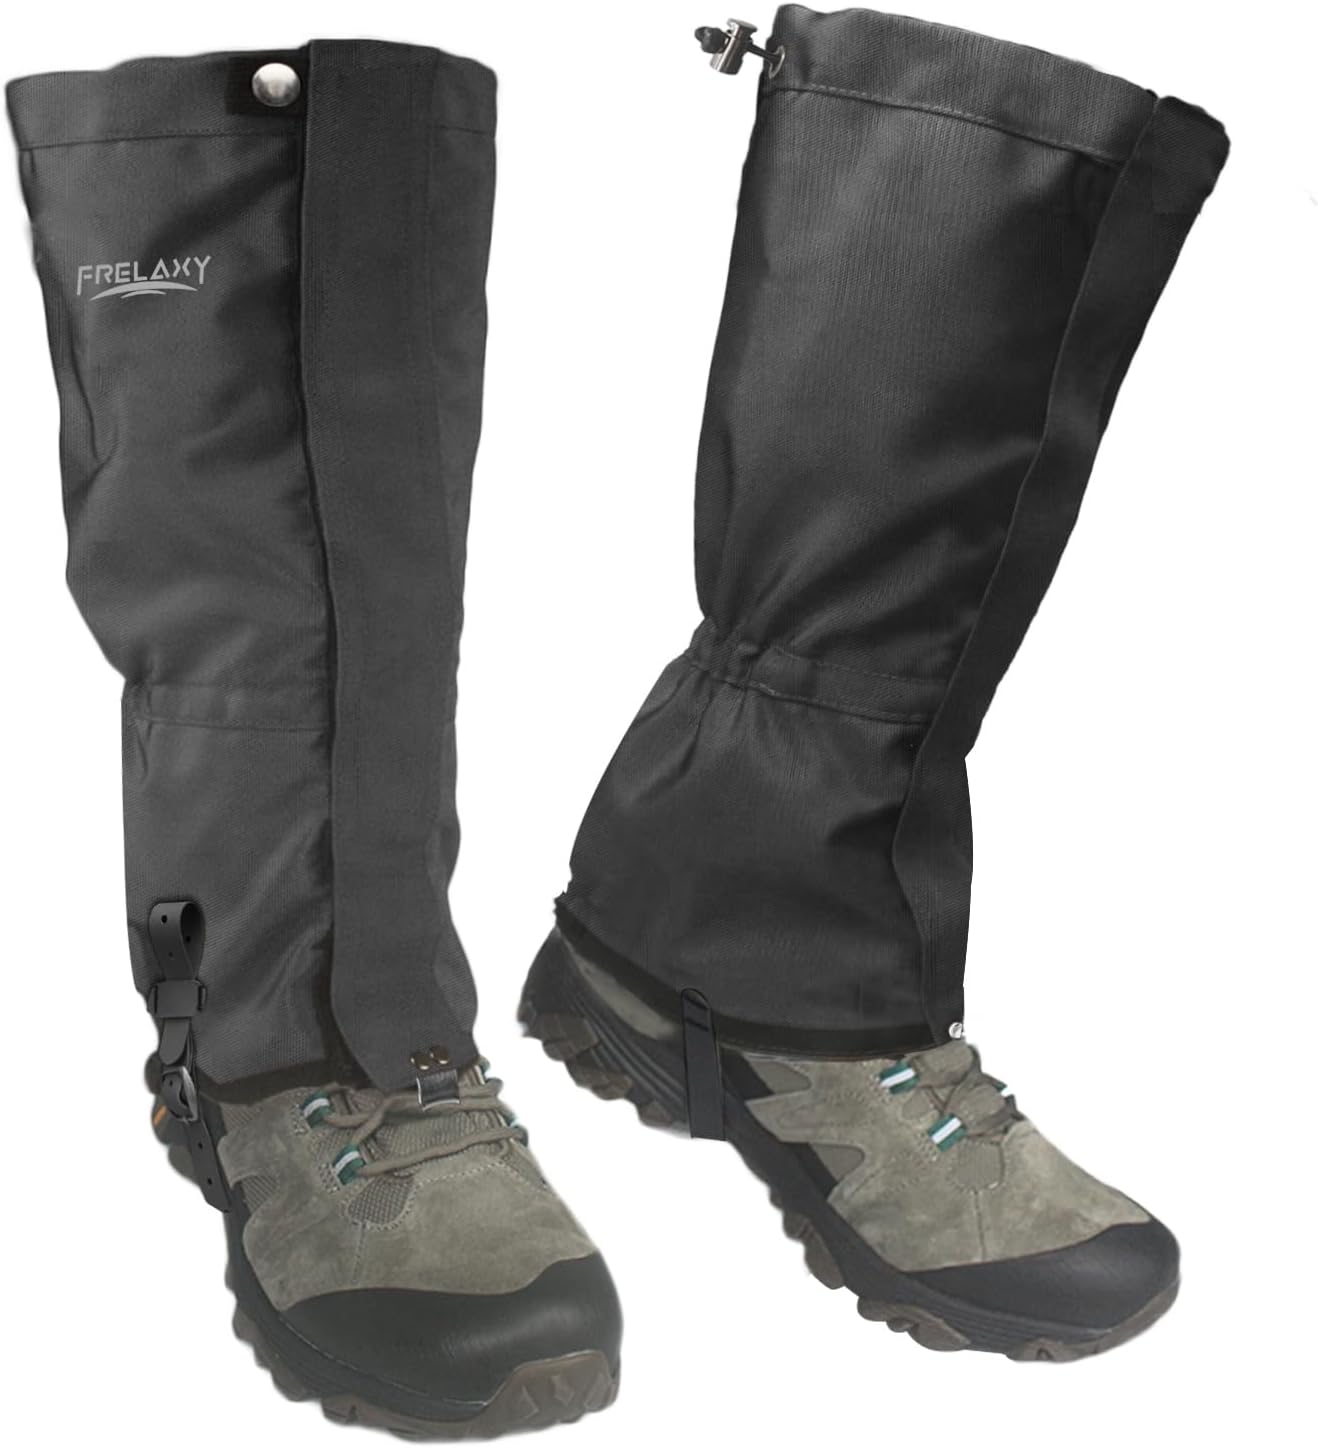 High Performance Leg Gaiters. Perfect For The Snow